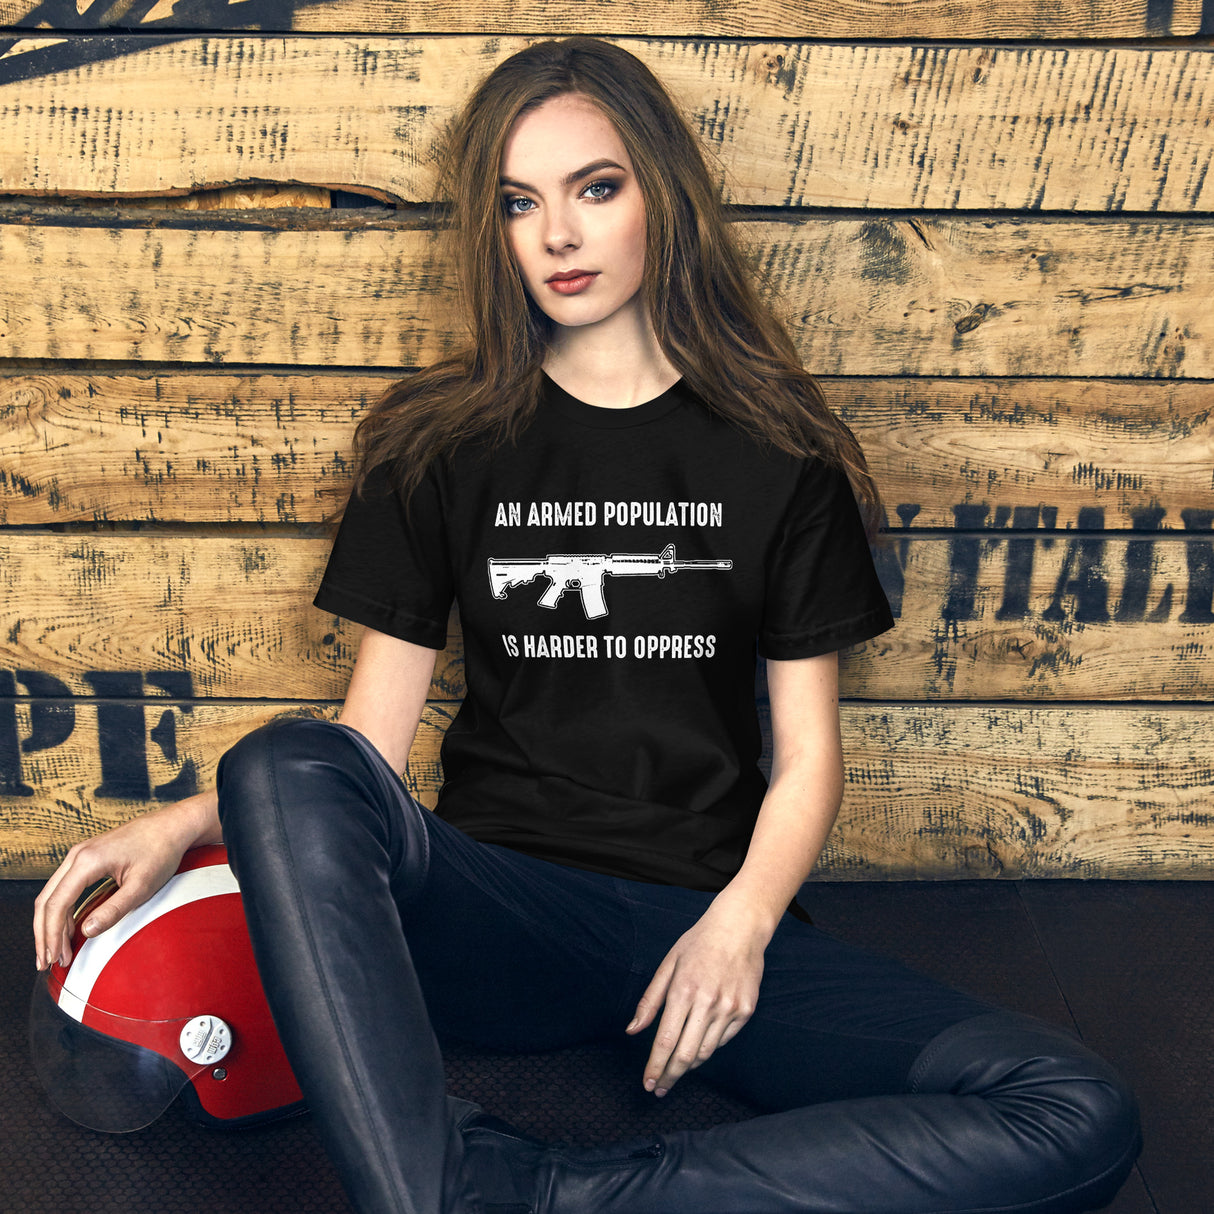 An Armed Population is Harder to Oppress Women's Shirt